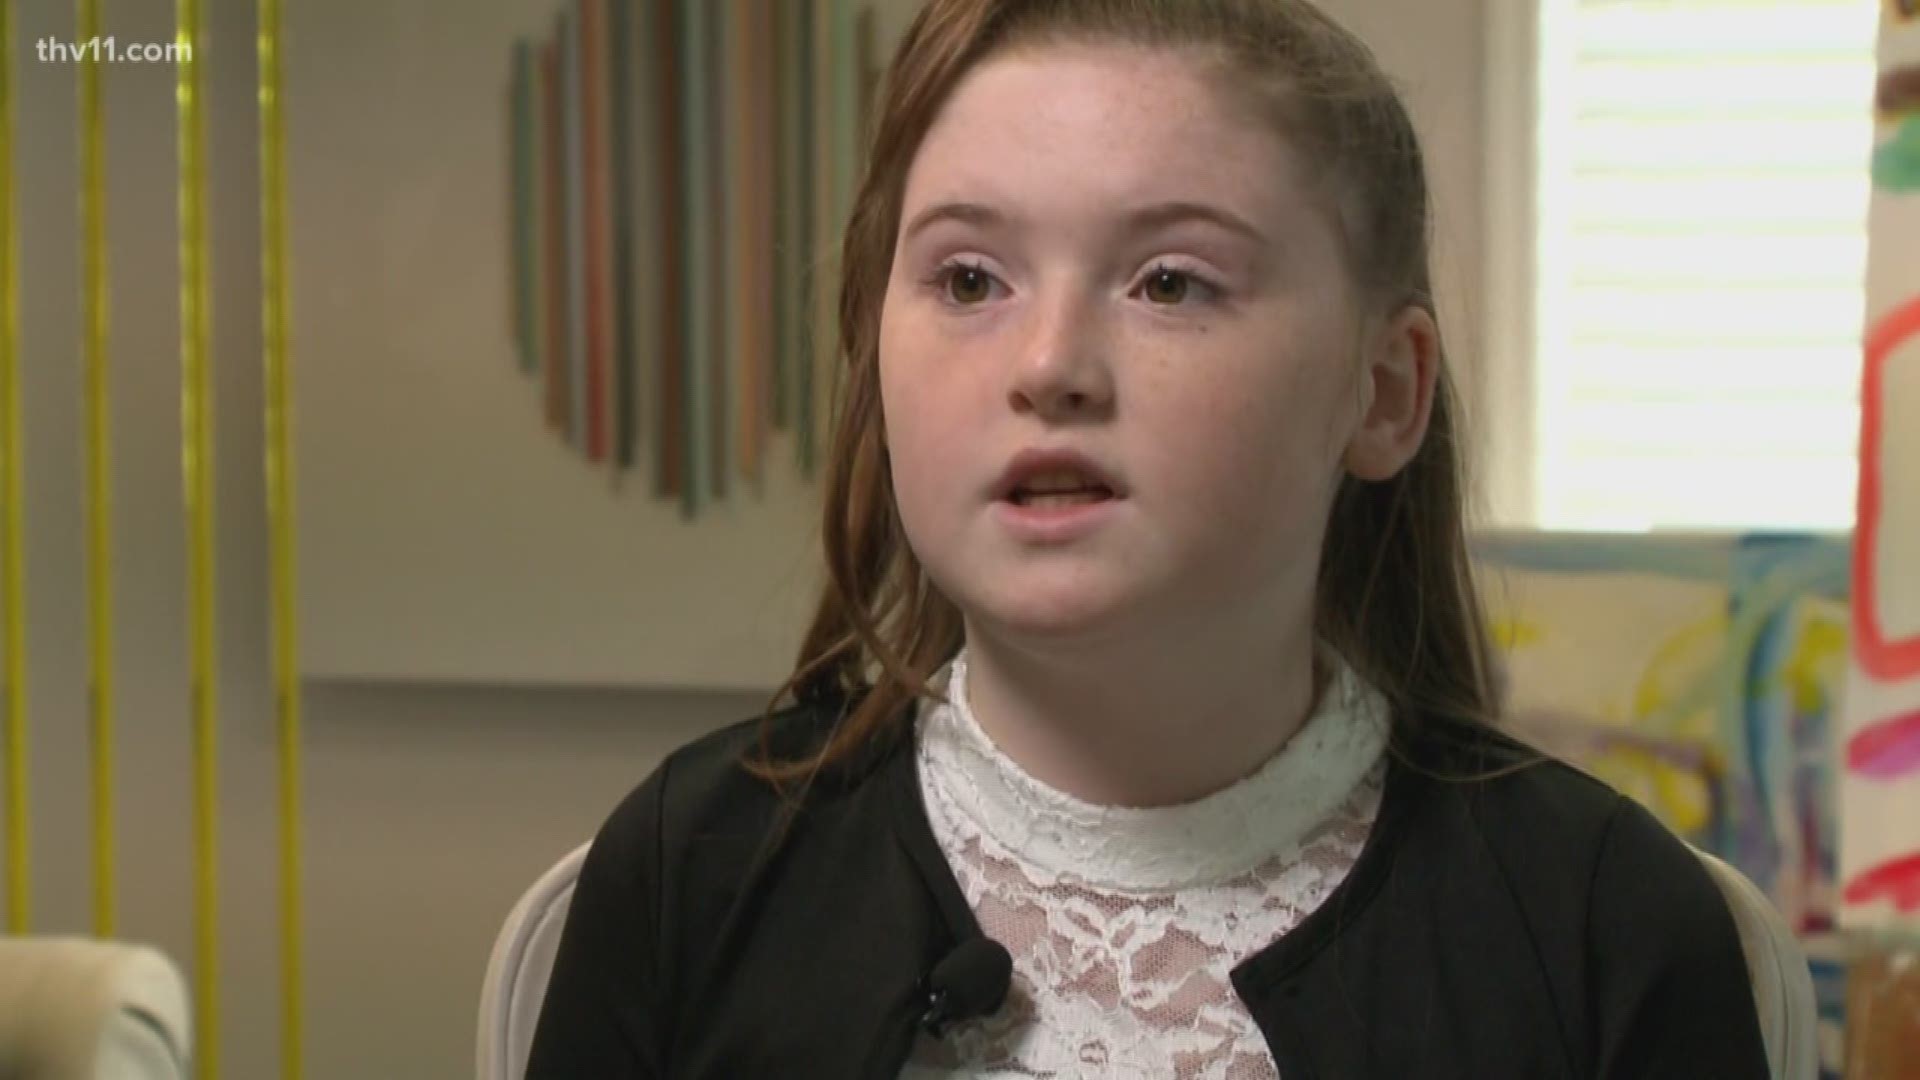 One 13-year-old has spent nearly half her life in foster care.